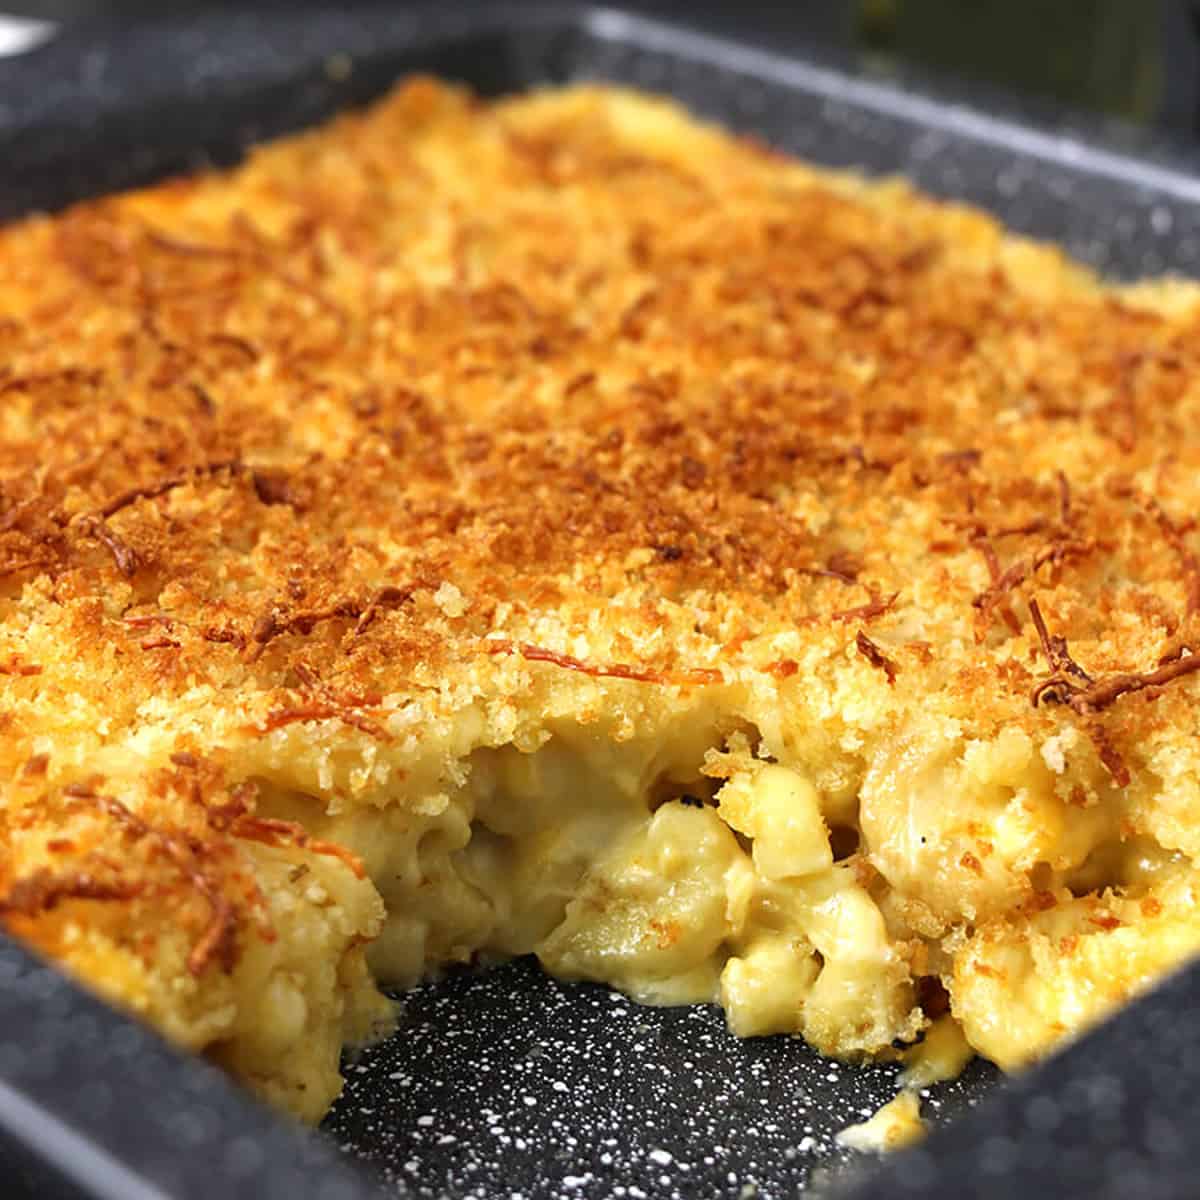 Oven baked mac and cheese recipe | Best and simple macaroni and cheese (stovetop and bake).